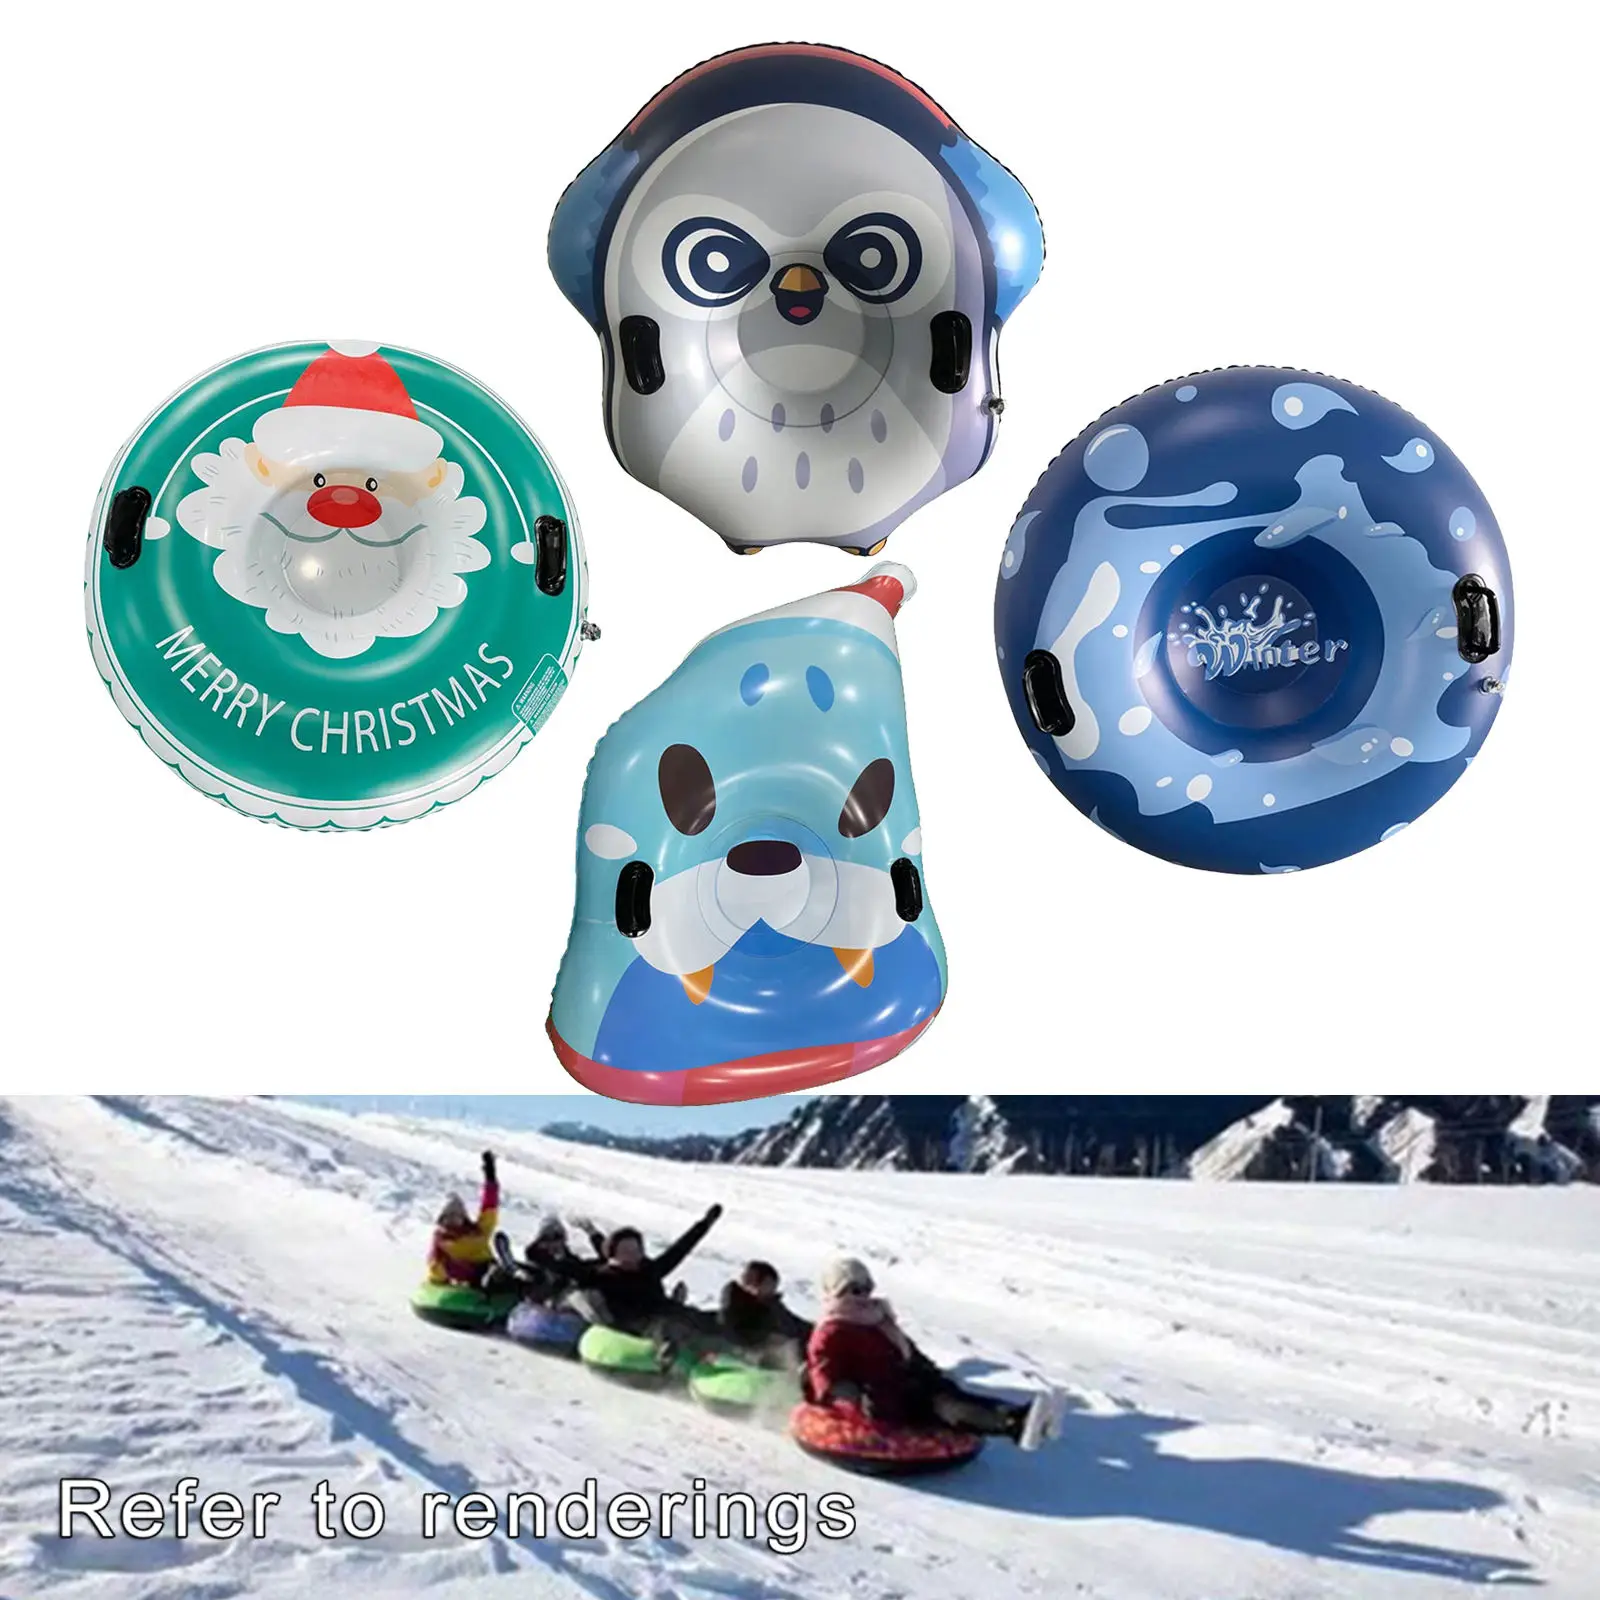 Thicked Snow Tube Game Fun Freeze-Resistant Outdoor Strong Handles Winter 47 inch Wear-Resistant Snow Sled Toy Kids and Adults